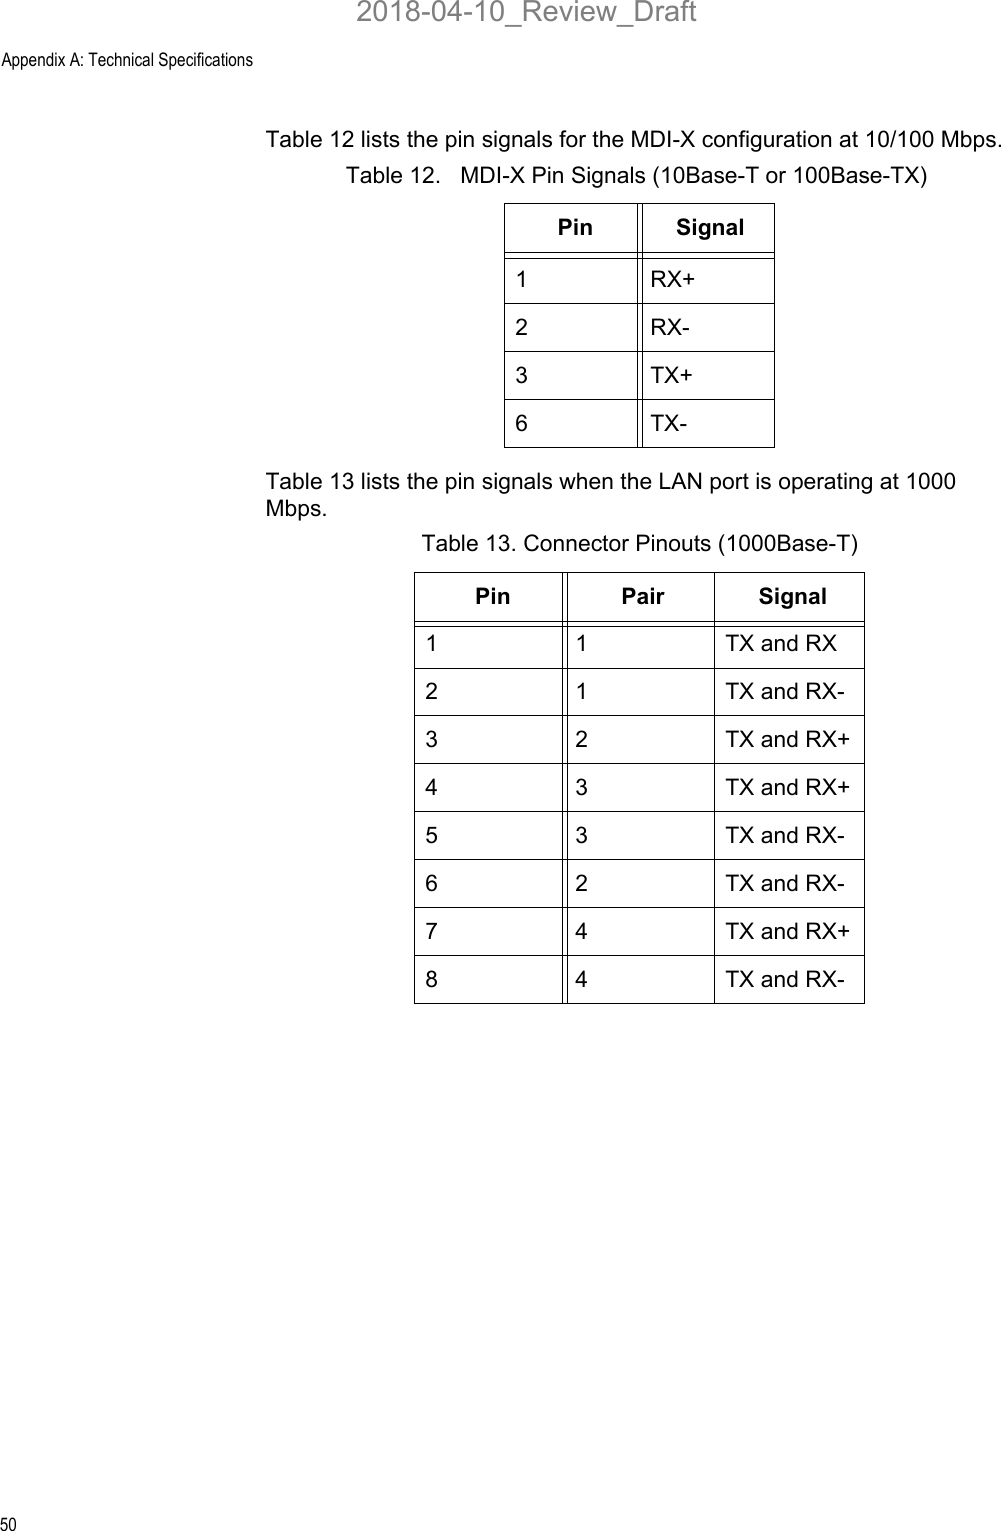 Appendix A: Technical Specifications50Table 12 lists the pin signals for the MDI-X configuration at 10/100 Mbps.Table 13 lists the pin signals when the LAN port is operating at 1000 Mbps.Table 12.   MDI-X Pin Signals (10Base-T or 100Base-TX)Pin Signal1RX+2RX-3TX+6TX-Table 13. Connector Pinouts (1000Base-T)Pin Pair Signal11TX and RX21TX and RX-32TX and RX+43TX and RX+53TX and RX-62TX and RX-74TX and RX+84TX and RX-2018-04-10_Review_Draft